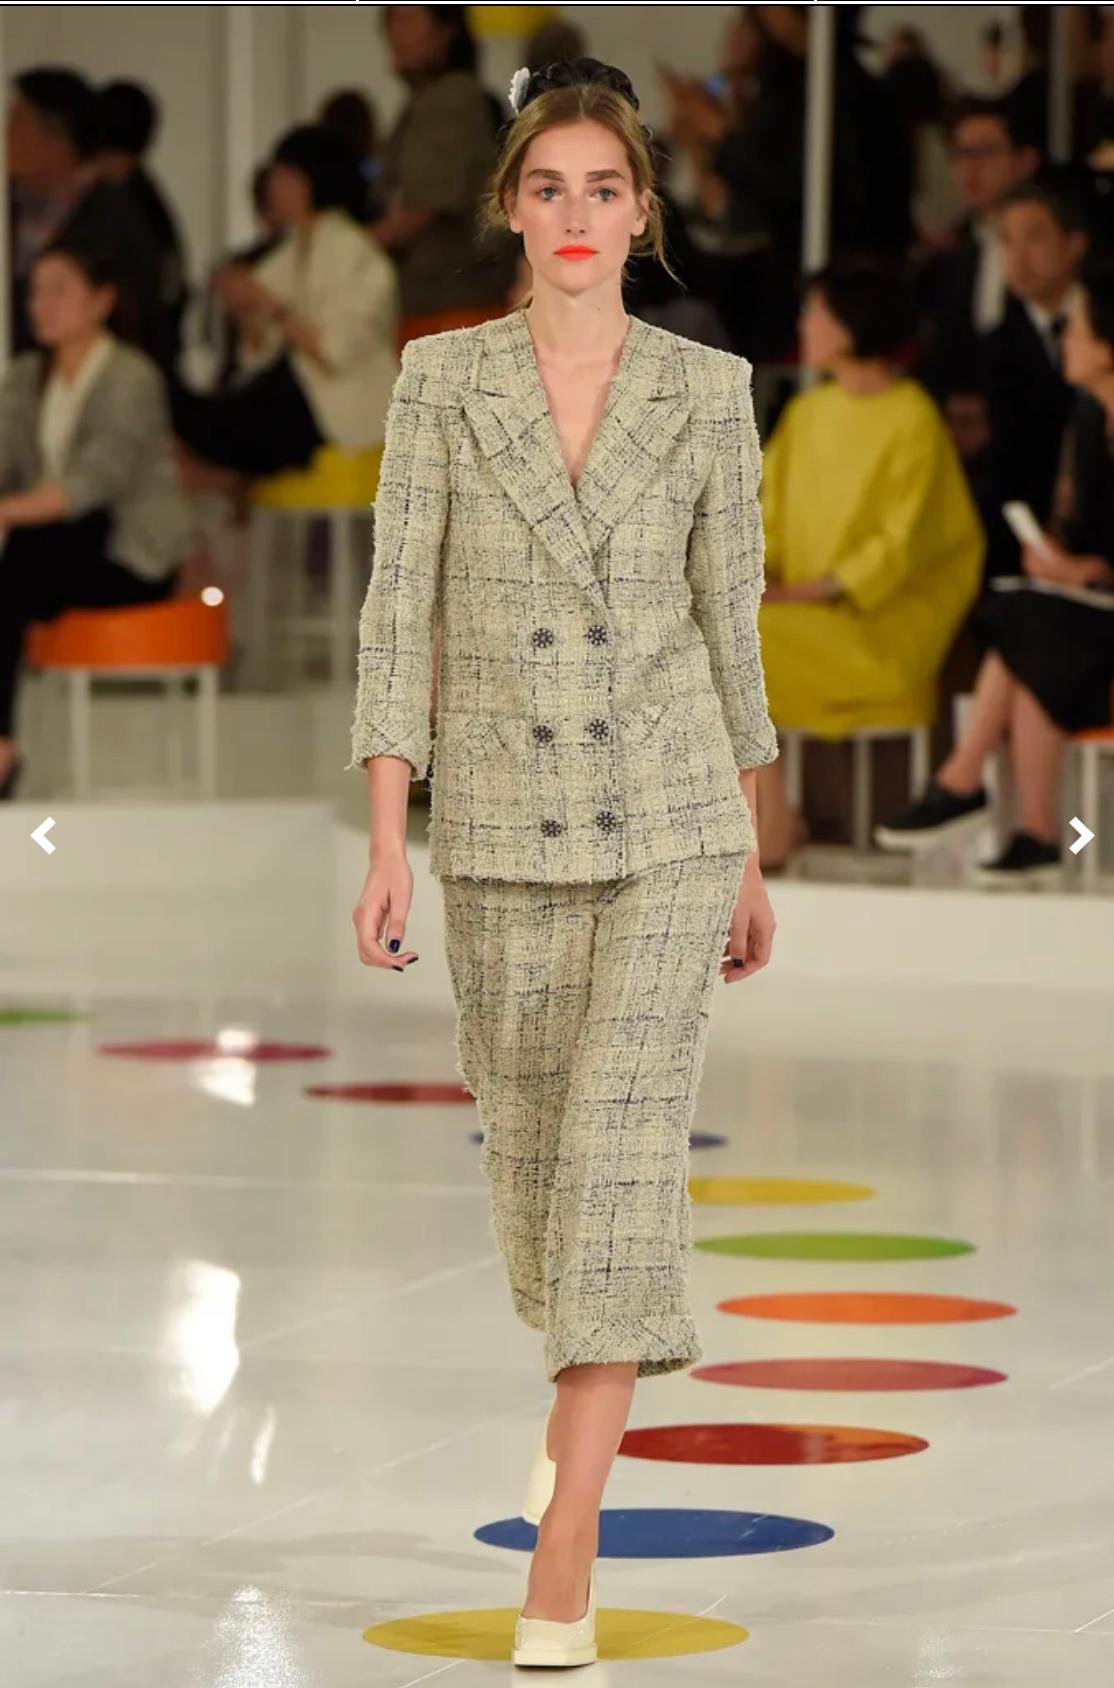 This 2016 Resort Runway CHANEL tweed jacket is crafted of tweed fabric in beige/black check pattern featuring a double-buttoned front and patch pockets. Luxurious and very soft to touch tweed. Chanel signature chained hemline. Made in France. Size